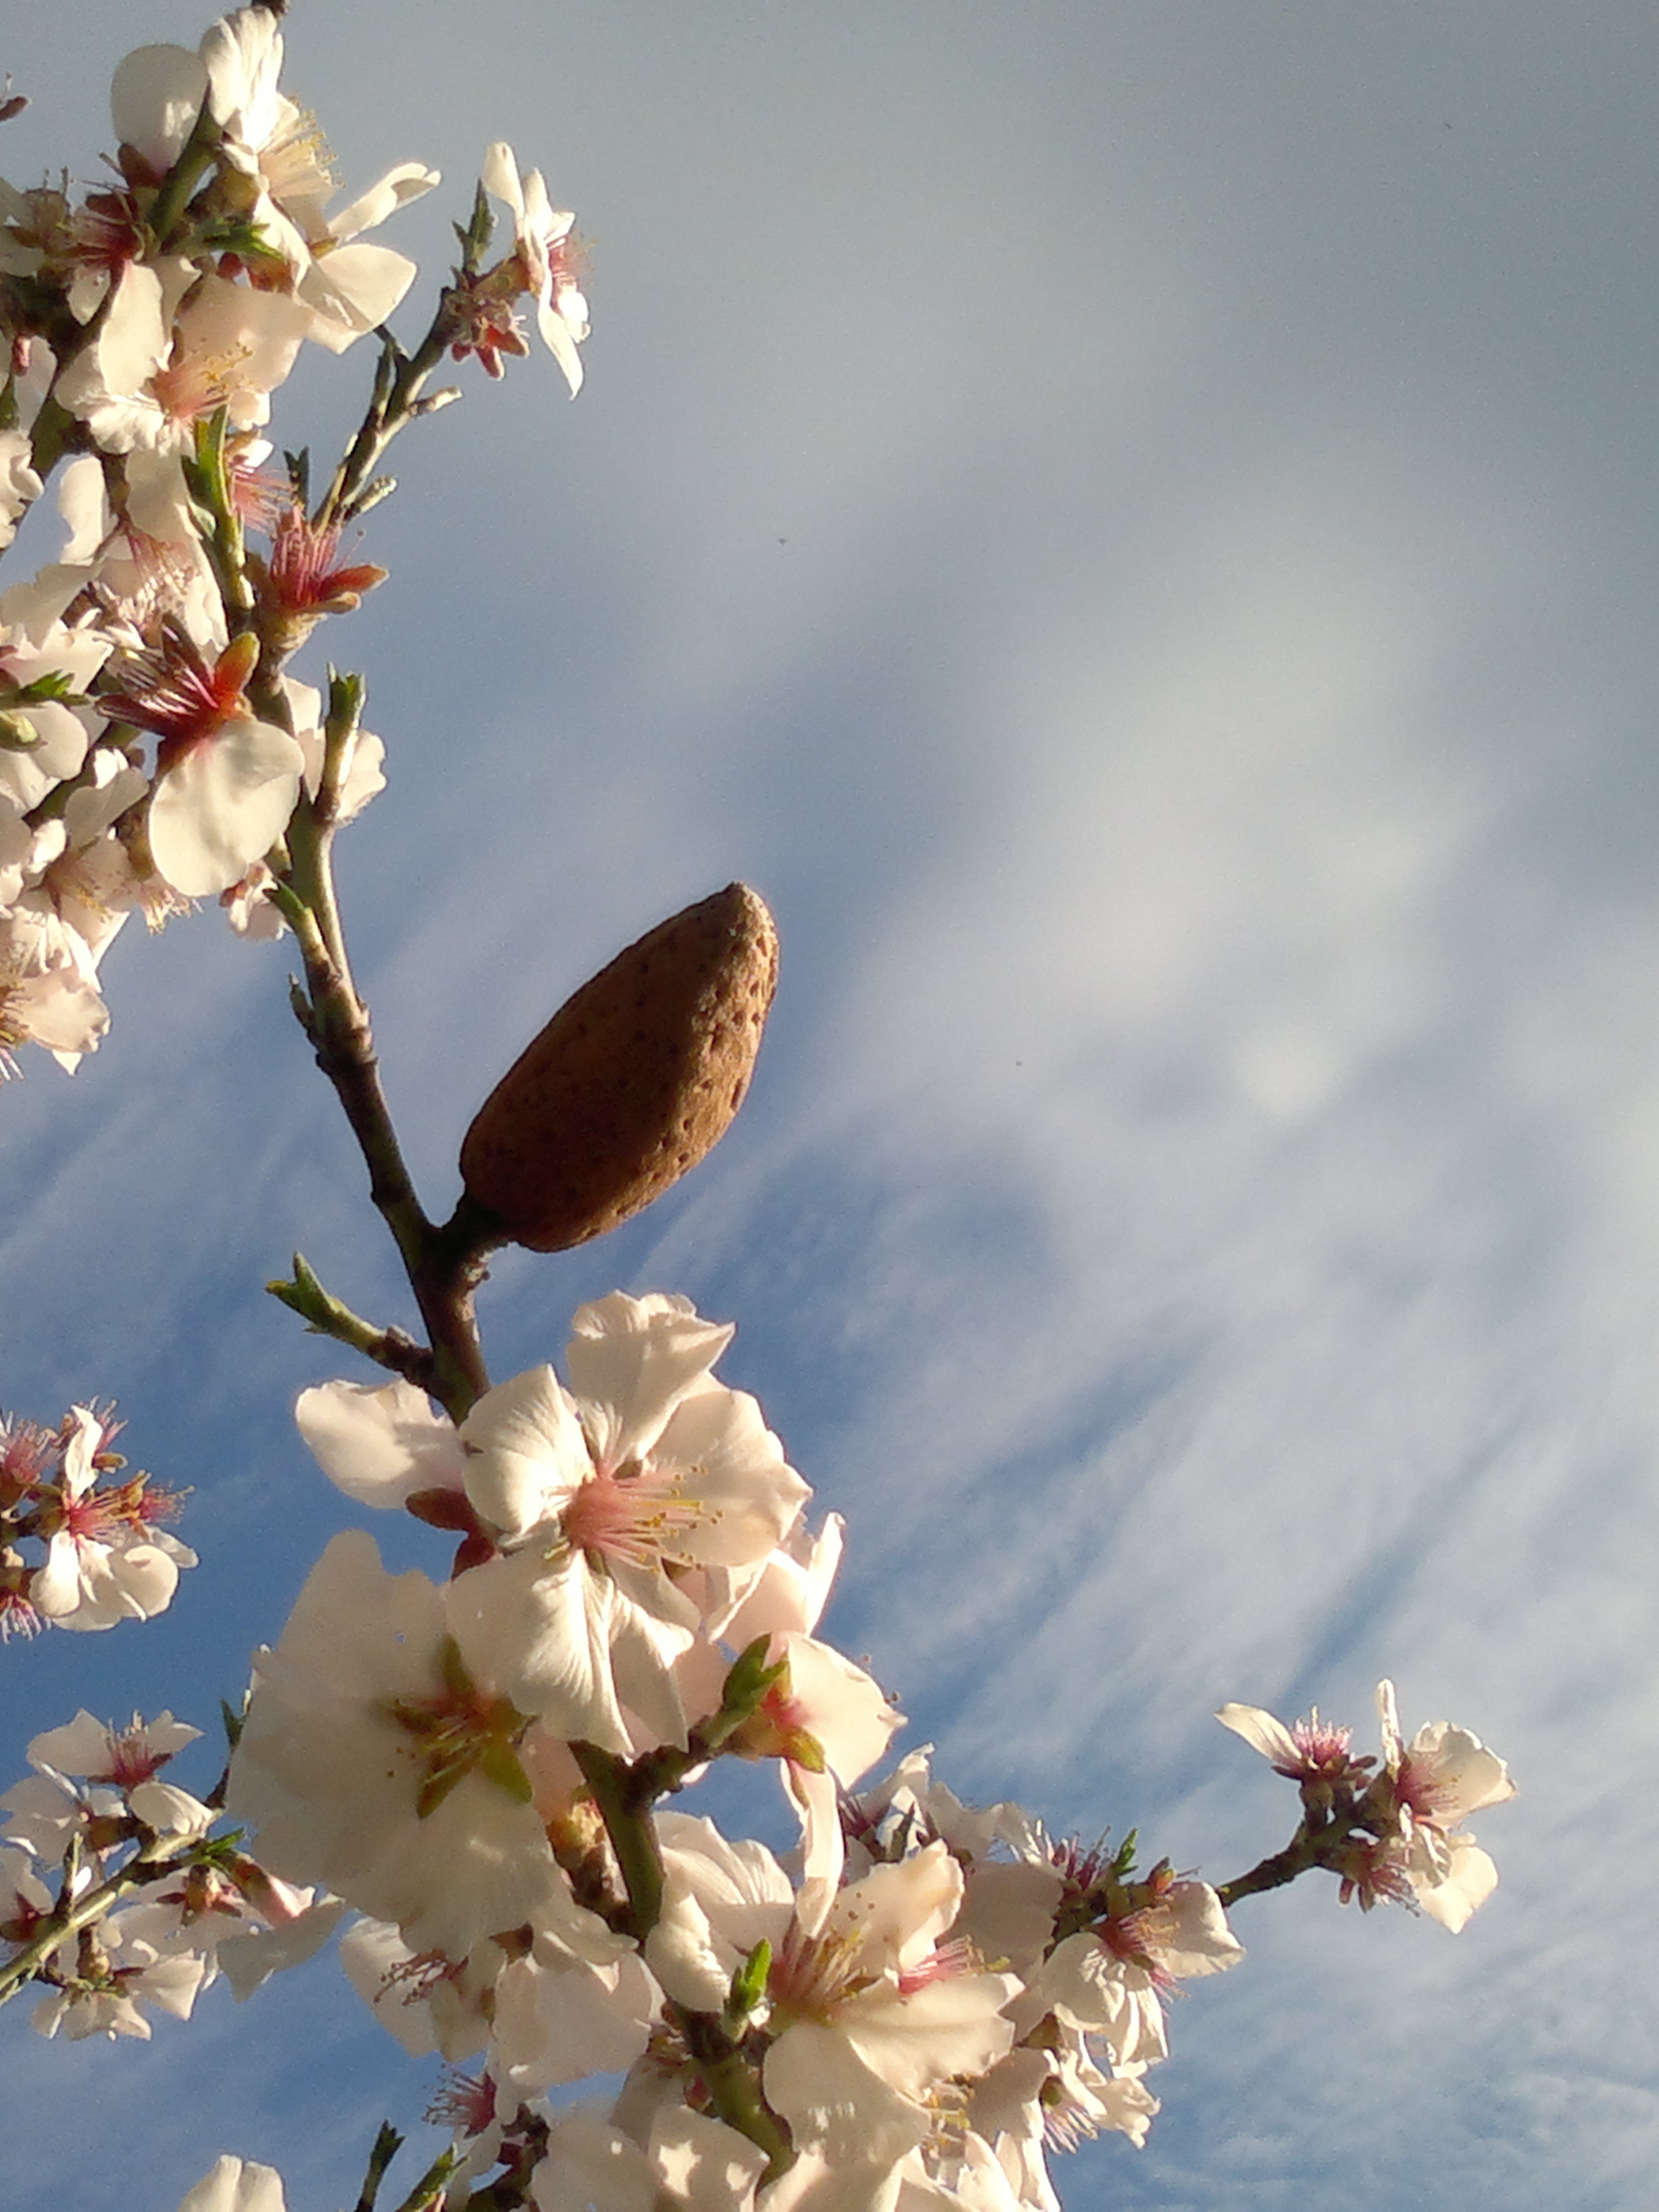 ALMOND TREES IN BLOOM - 1 SIGFRIDSSON